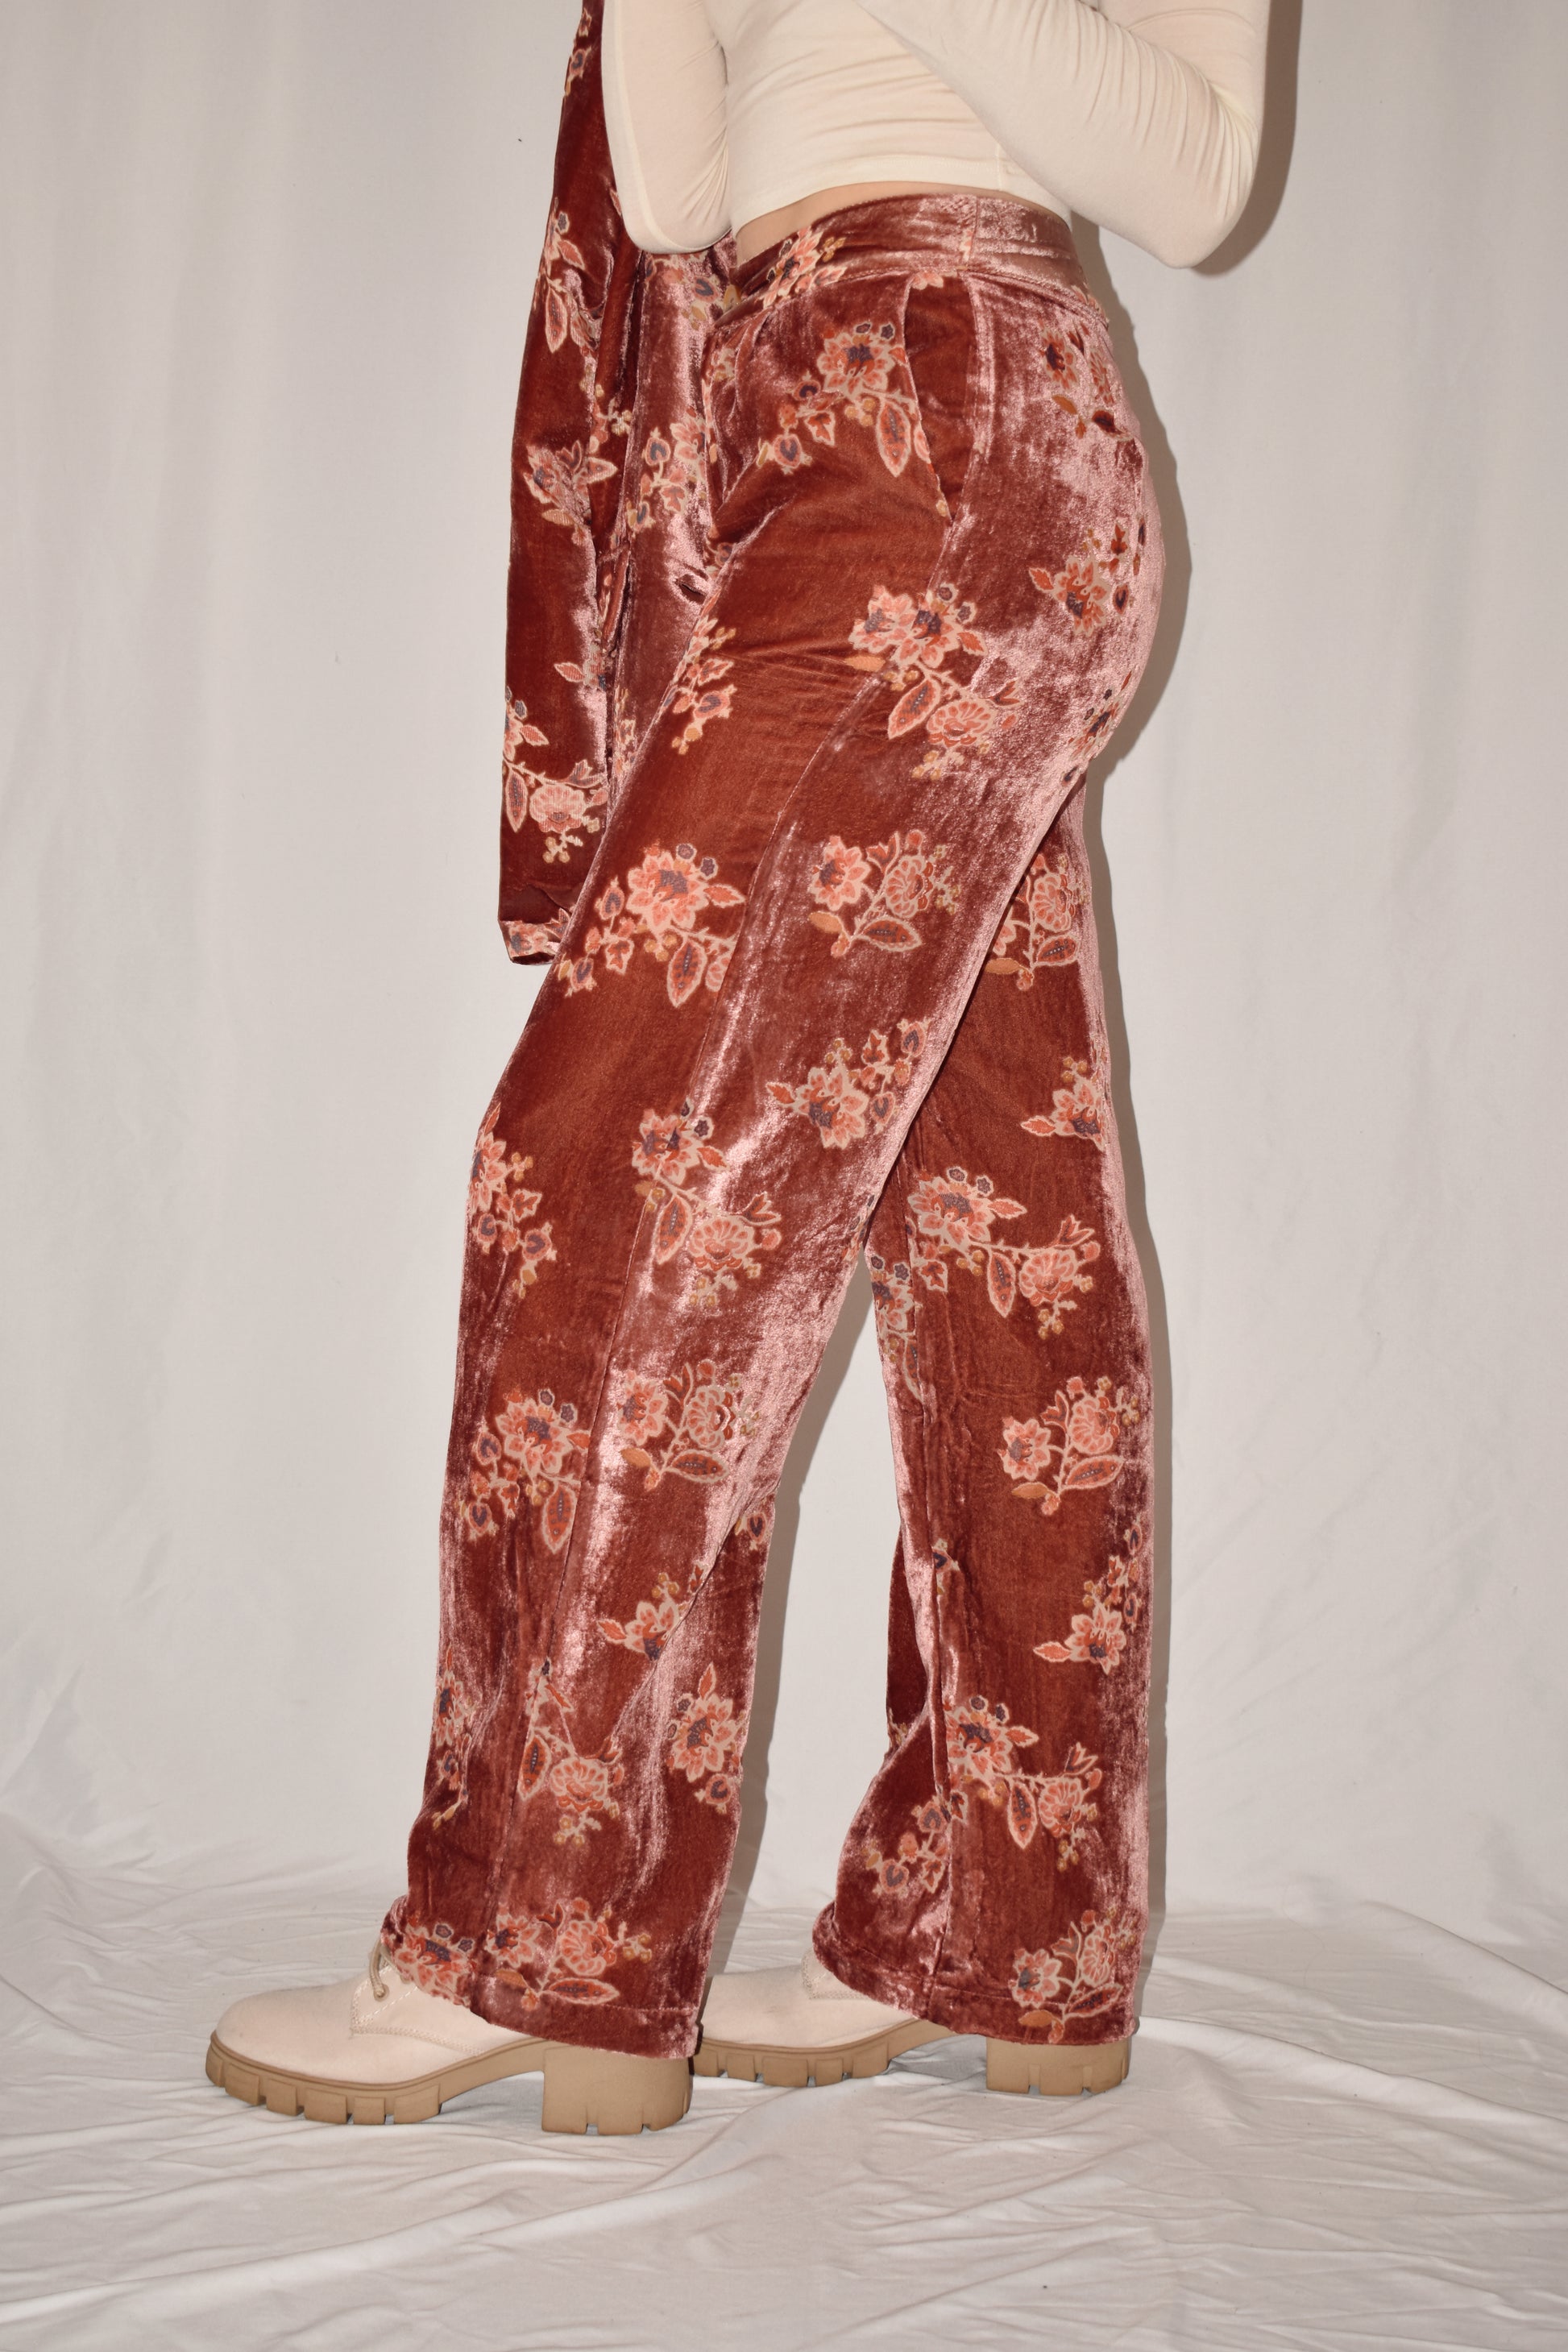 Mauve velvet straight leg trousers with side pockets and zip and button front enclosure. floral pattern. full length.